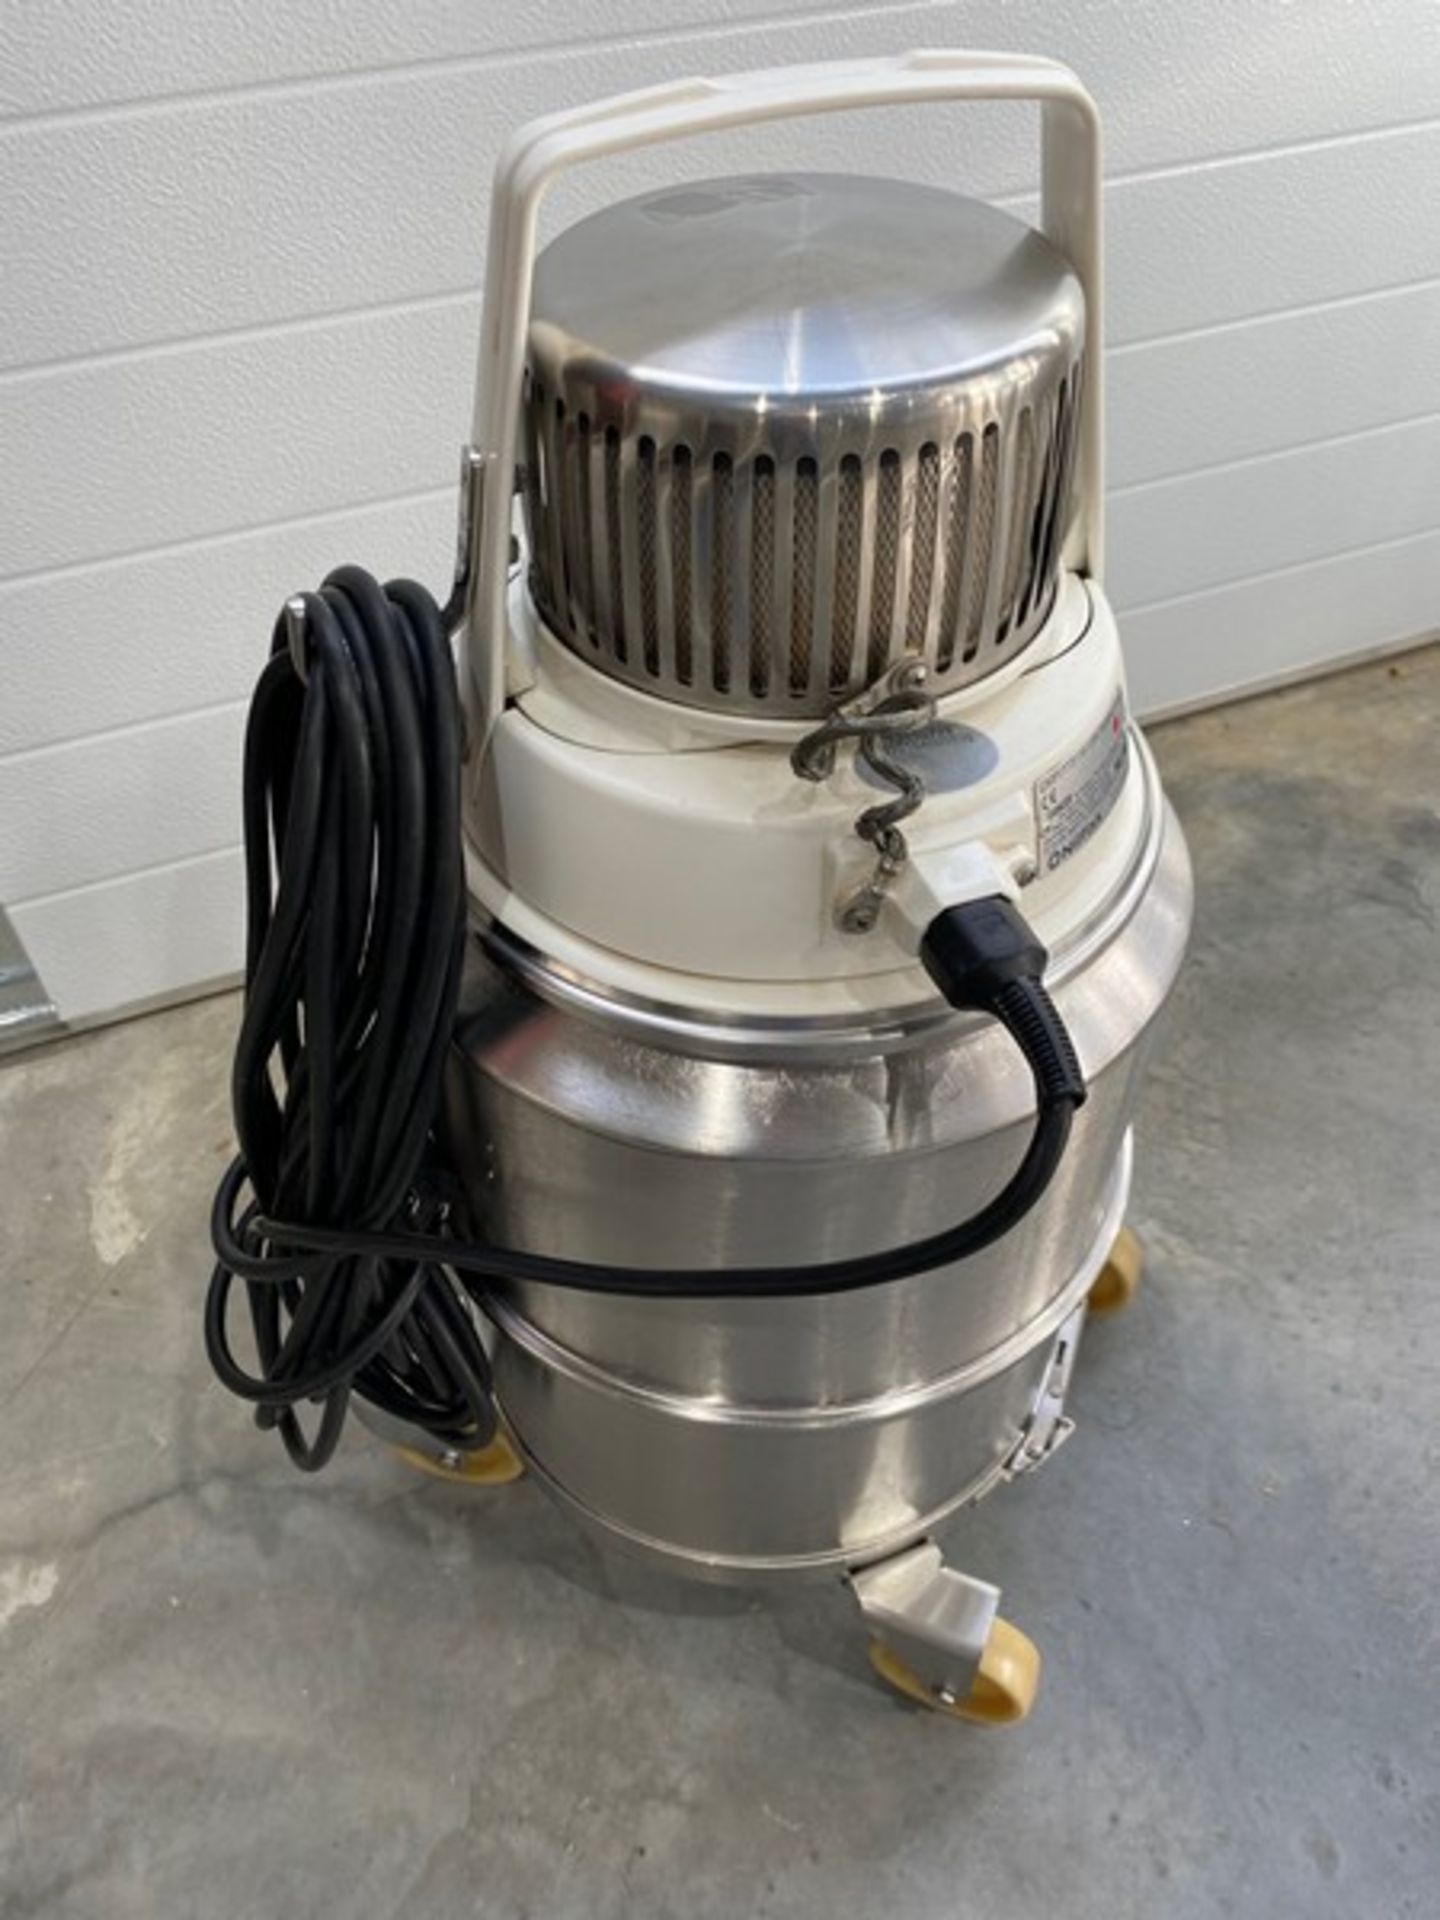 Nilfisk Critical Area Stainless Steel Vacuums. Model: IVT/1000CR, Vacuum has been run tested, As